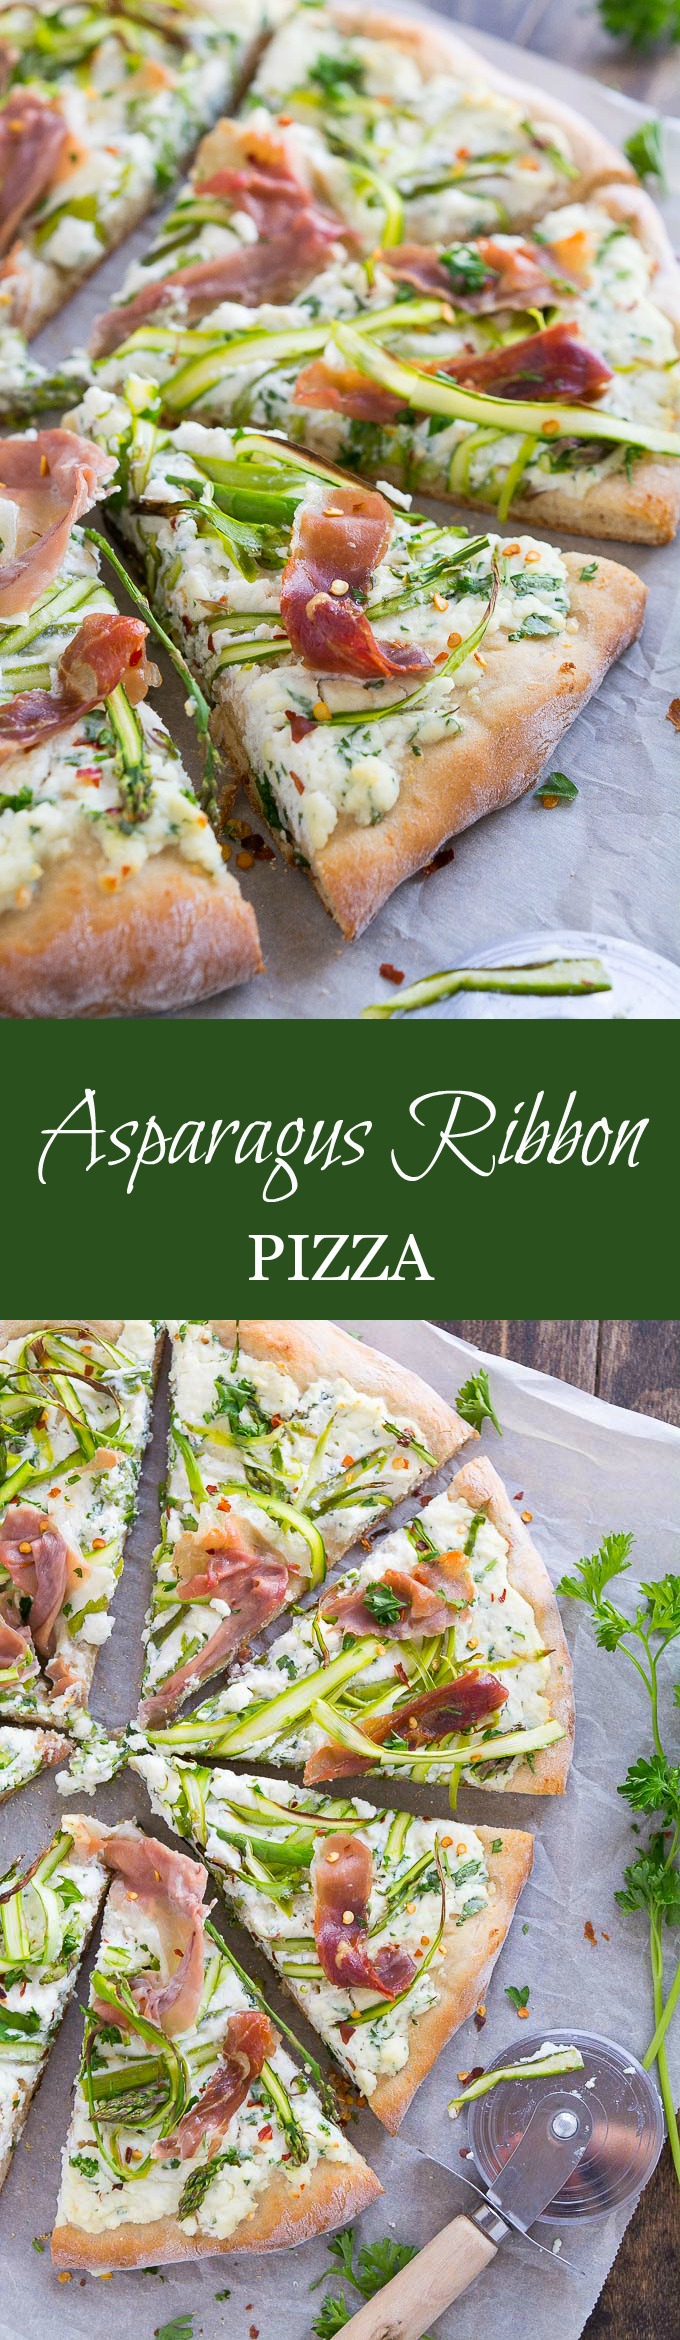 Jump into spring with this Asparagus Ribbon Pizza made with ricotta cheese and crispy prosciutto on a quick and easy no knead, no rise pizza dough.